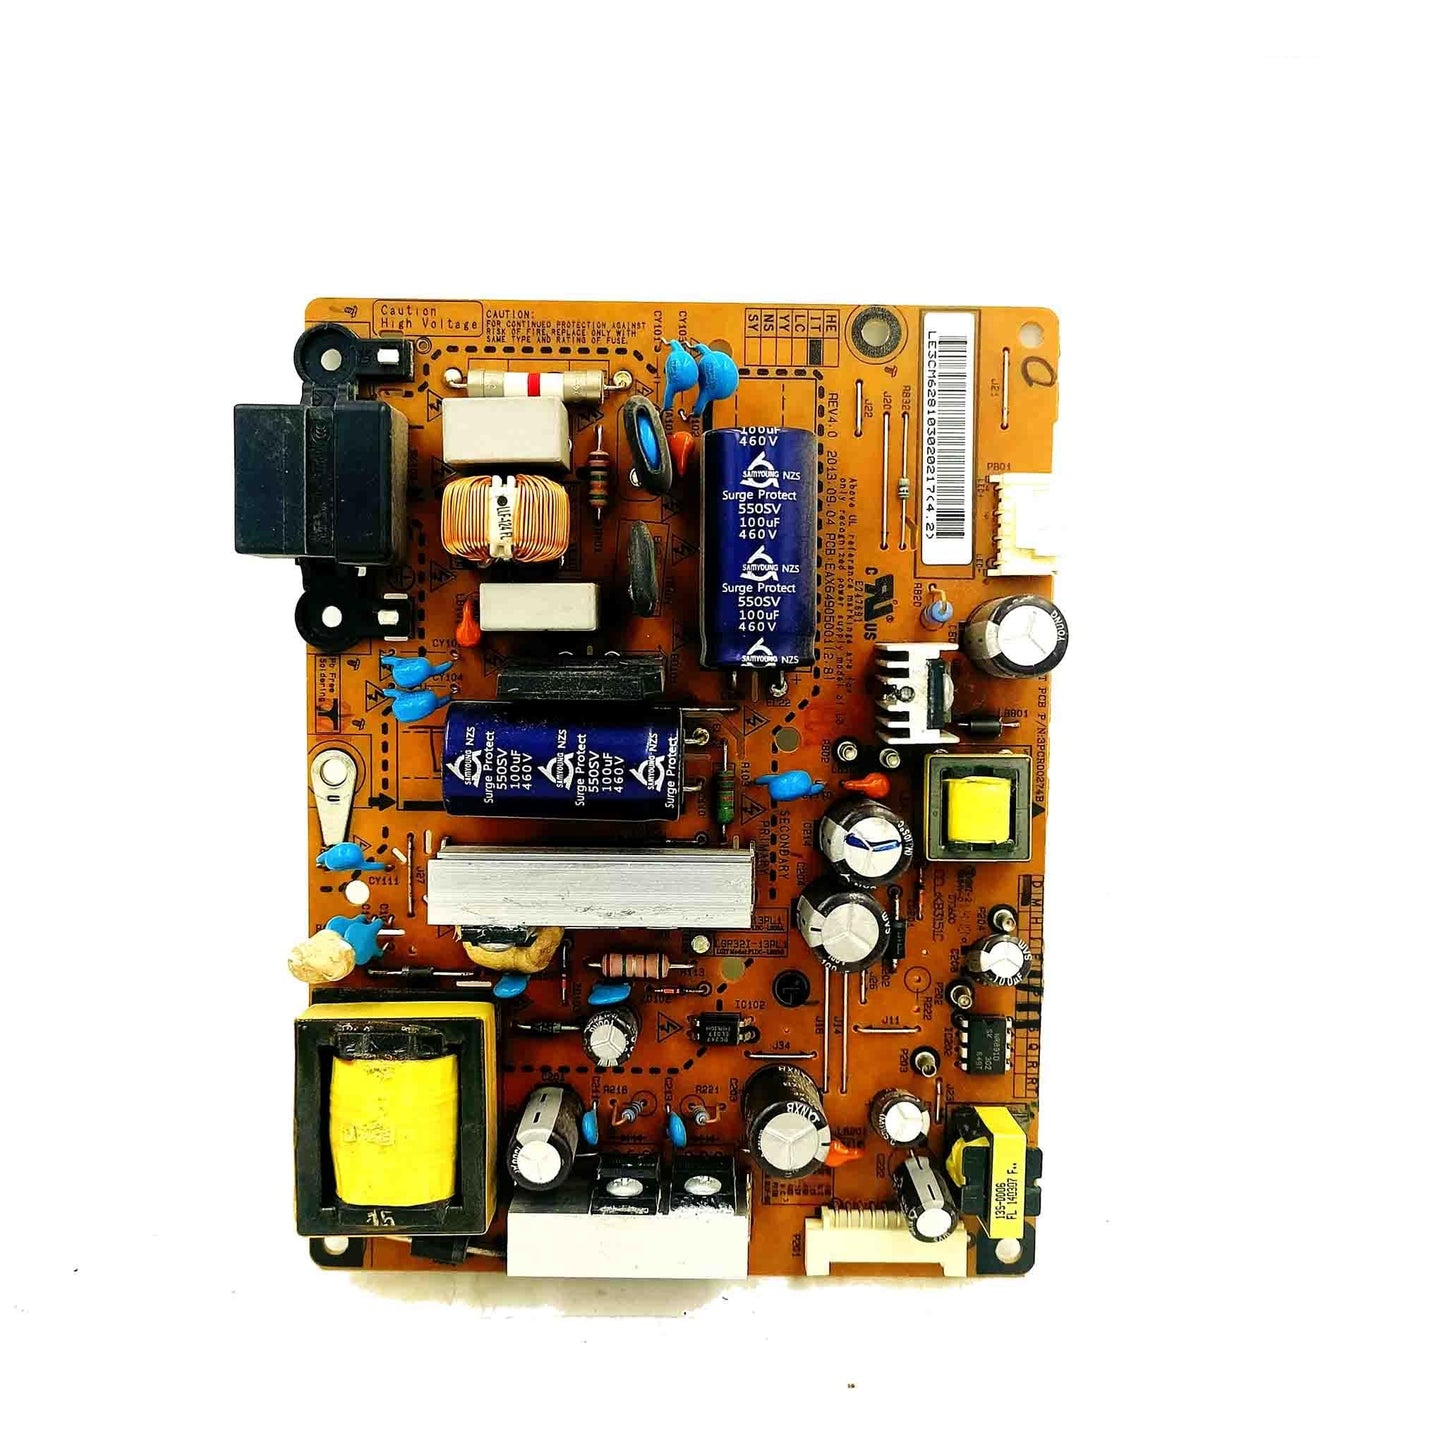 Power Supply Suitable for LG LED TV Model 32LN5150-TL